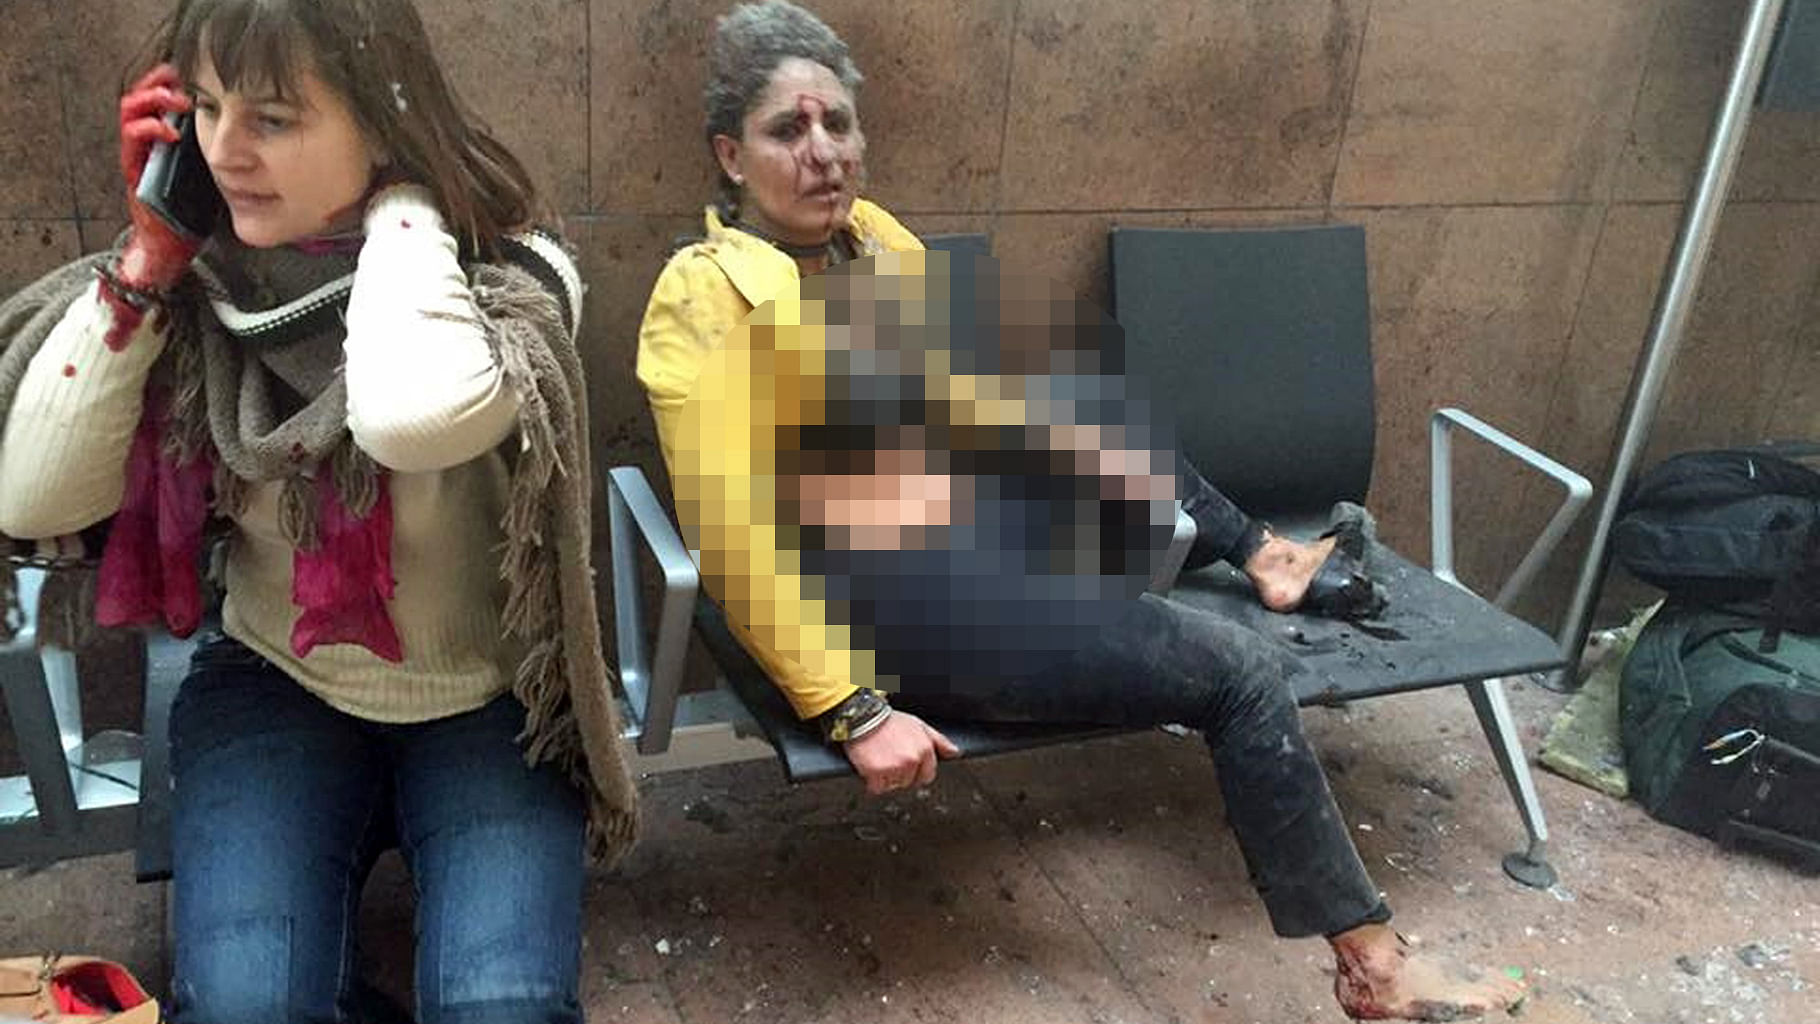 Nidhi Chaphekar, a 40-year-old Jet Airways flight attendant from Mumbai, right, and another unidentified woman after being wounded in Brussels Airport in Brussels, Belgium, after explosions were heard Tuesday, 22 March 2016.(Photo:AP)